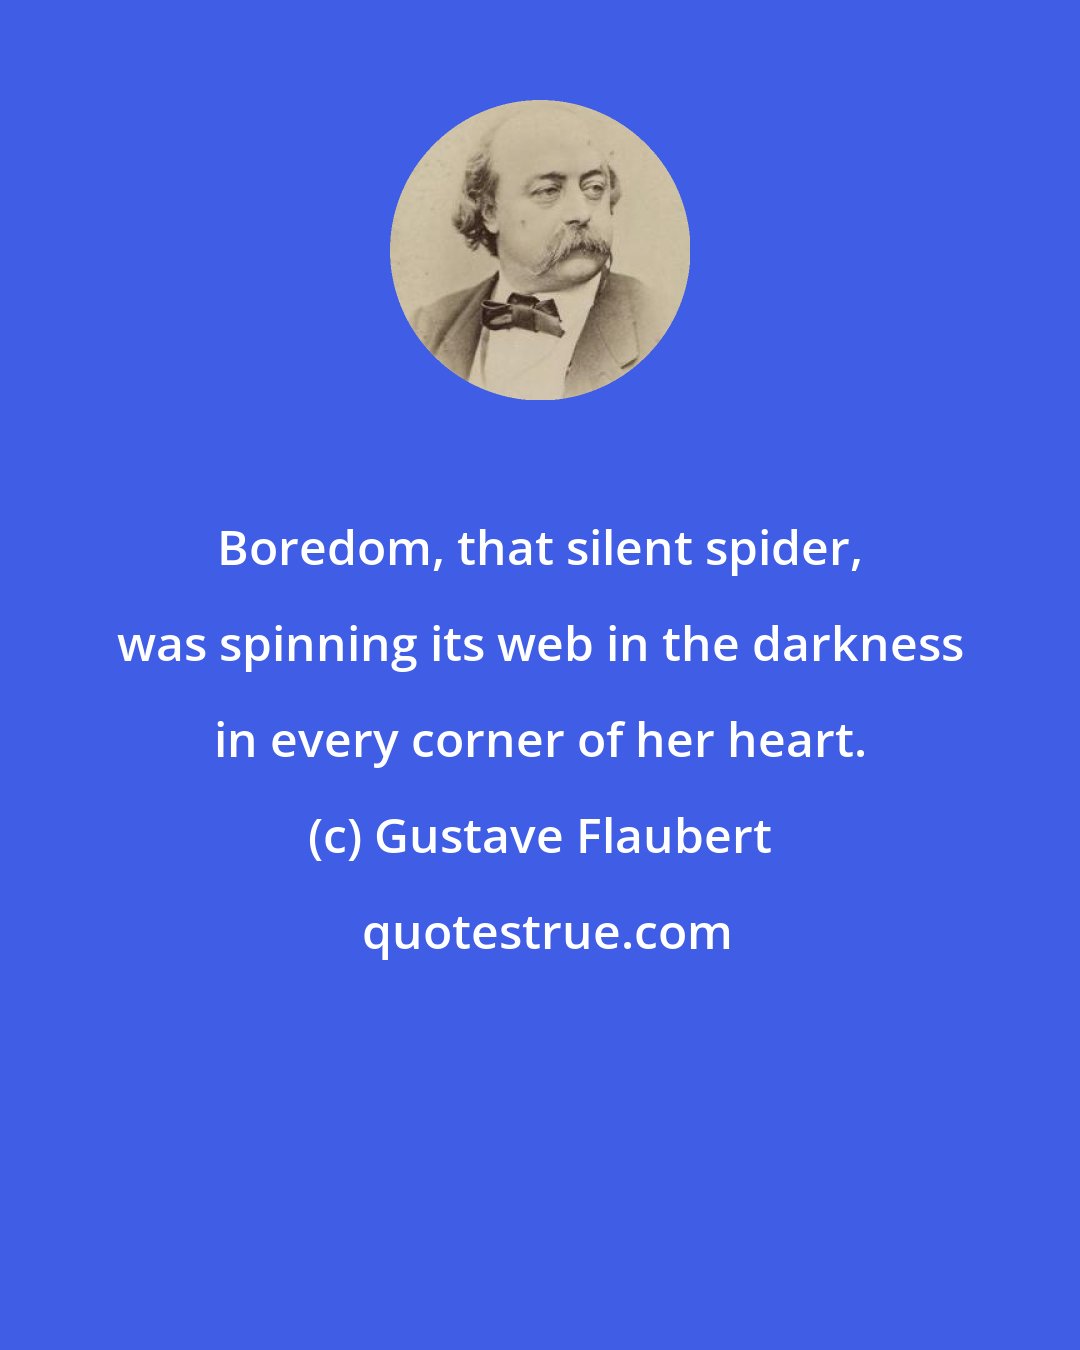 Gustave Flaubert: Boredom, that silent spider, was spinning its web in the darkness in every corner of her heart.